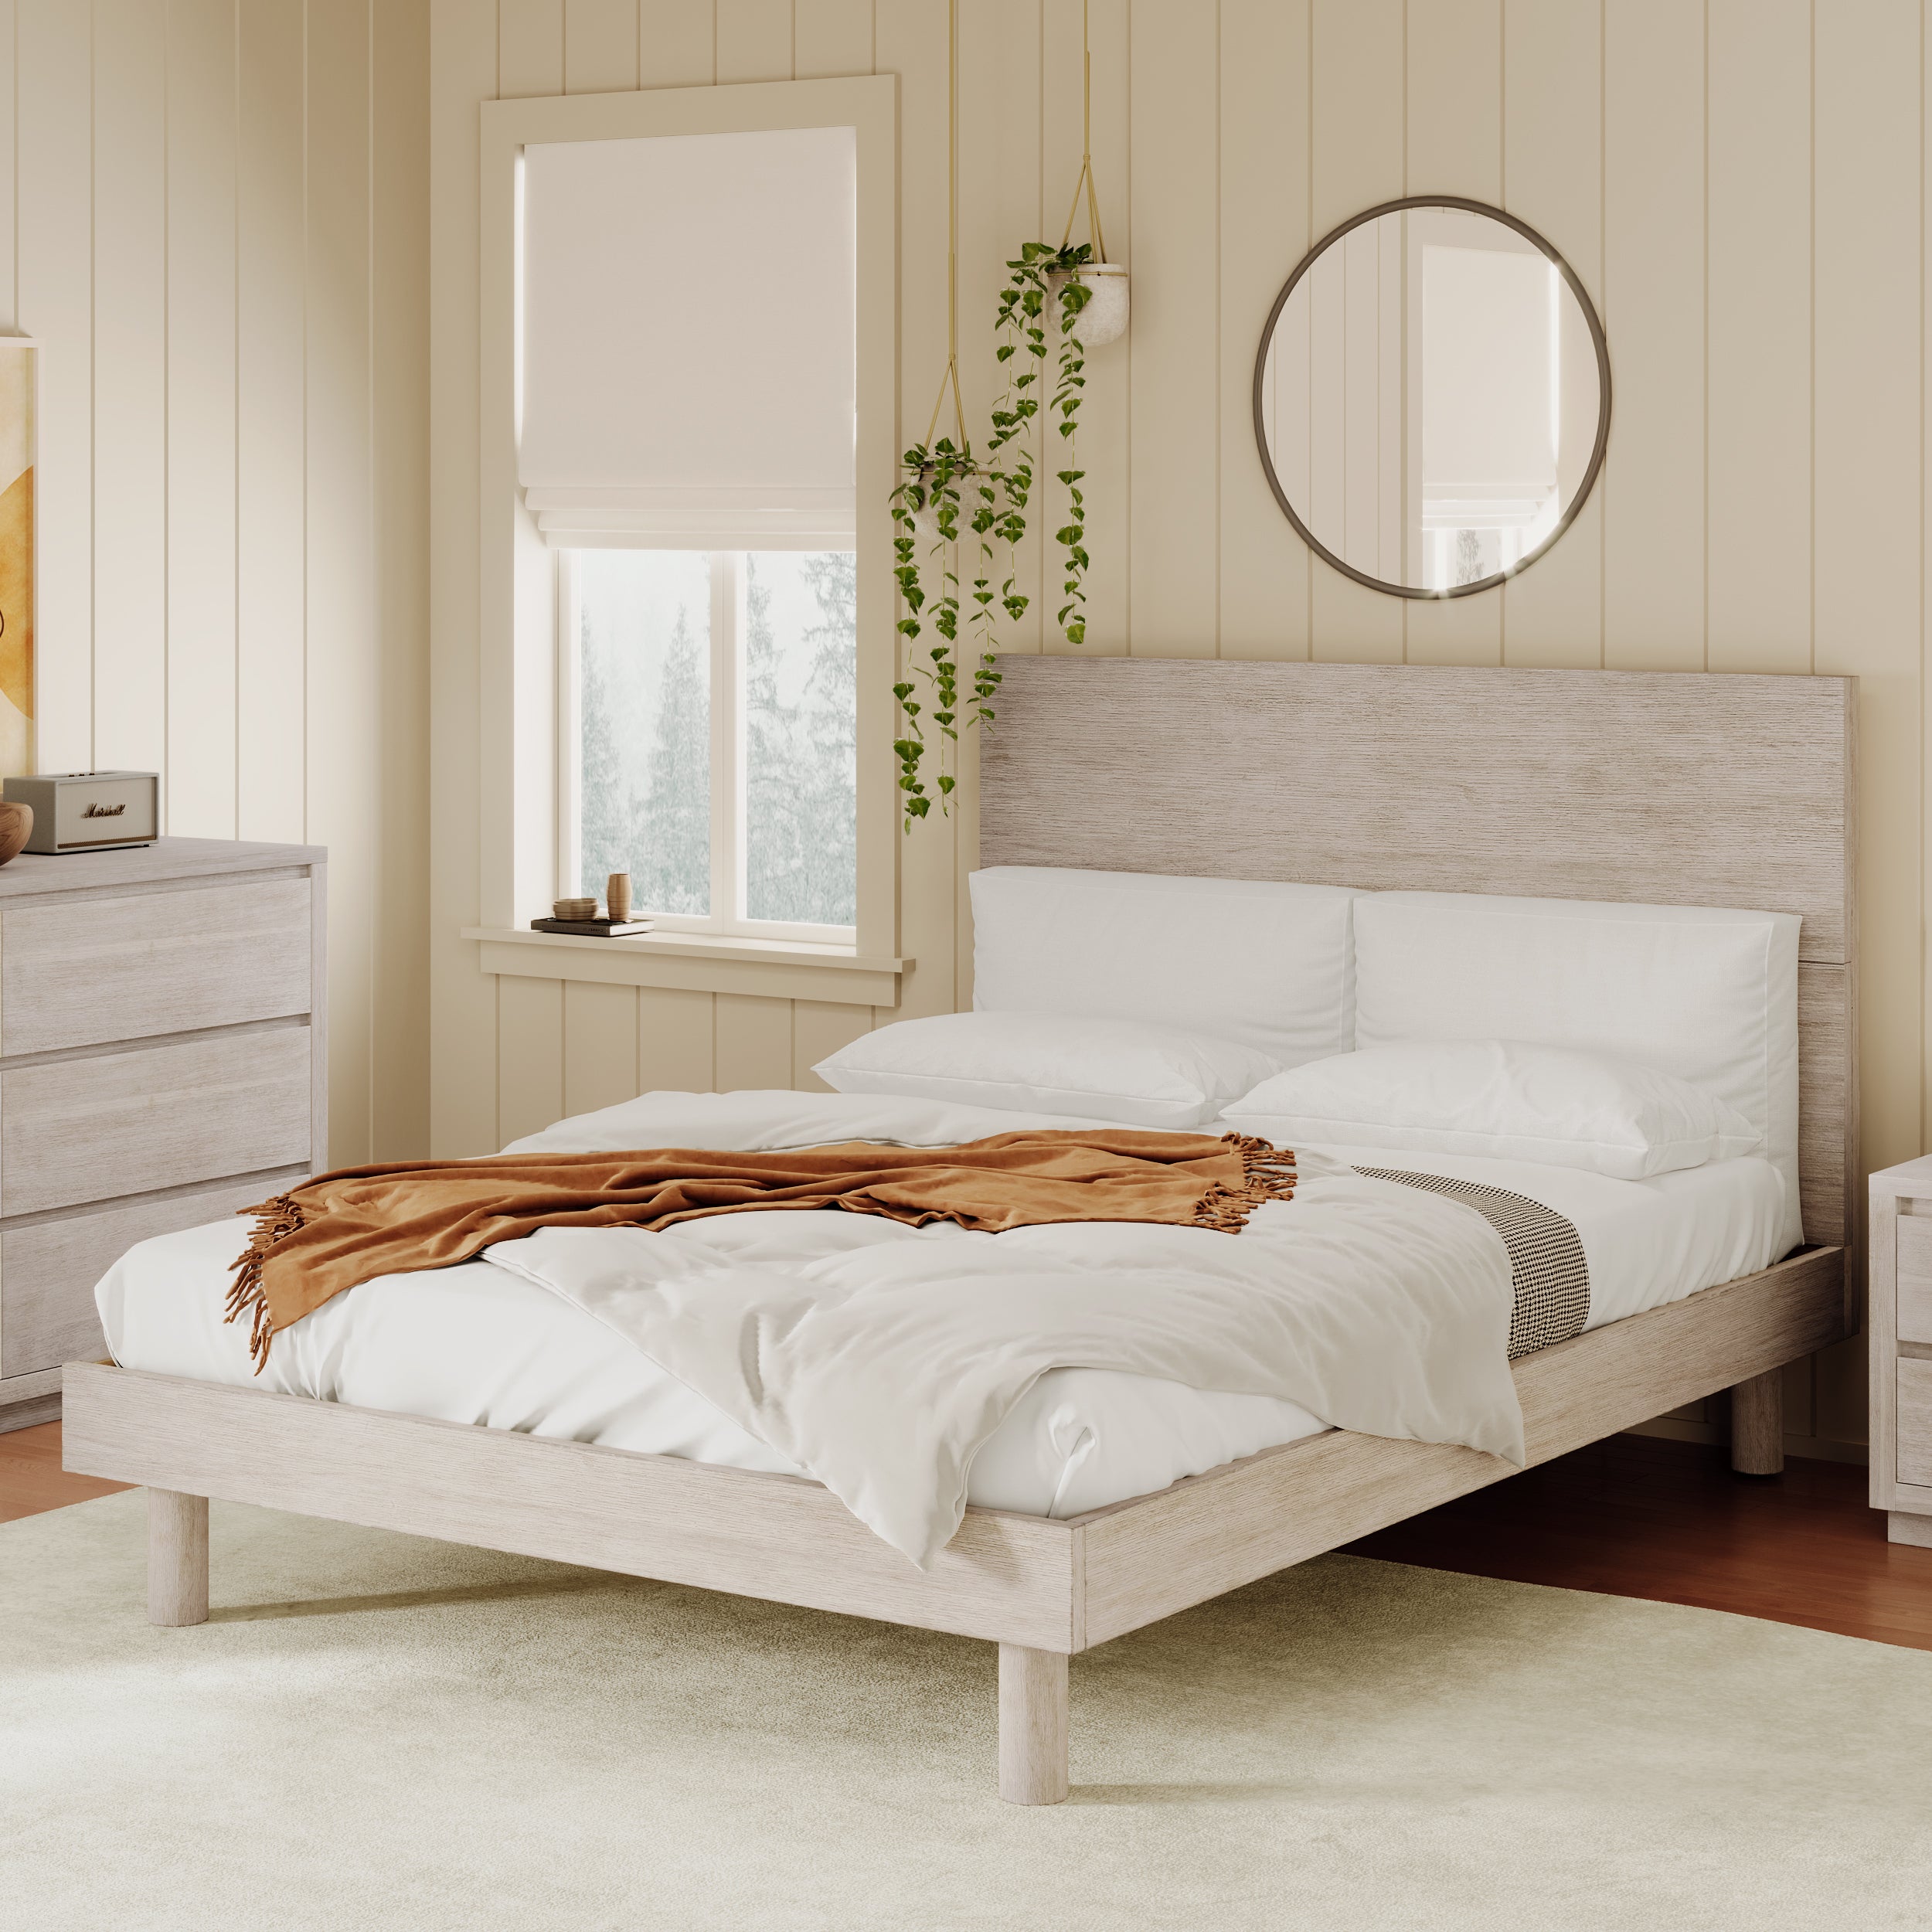 Full Bed Size Modern Concise Style Solid Wood Grain Platform Bed Frame - Stone Grey